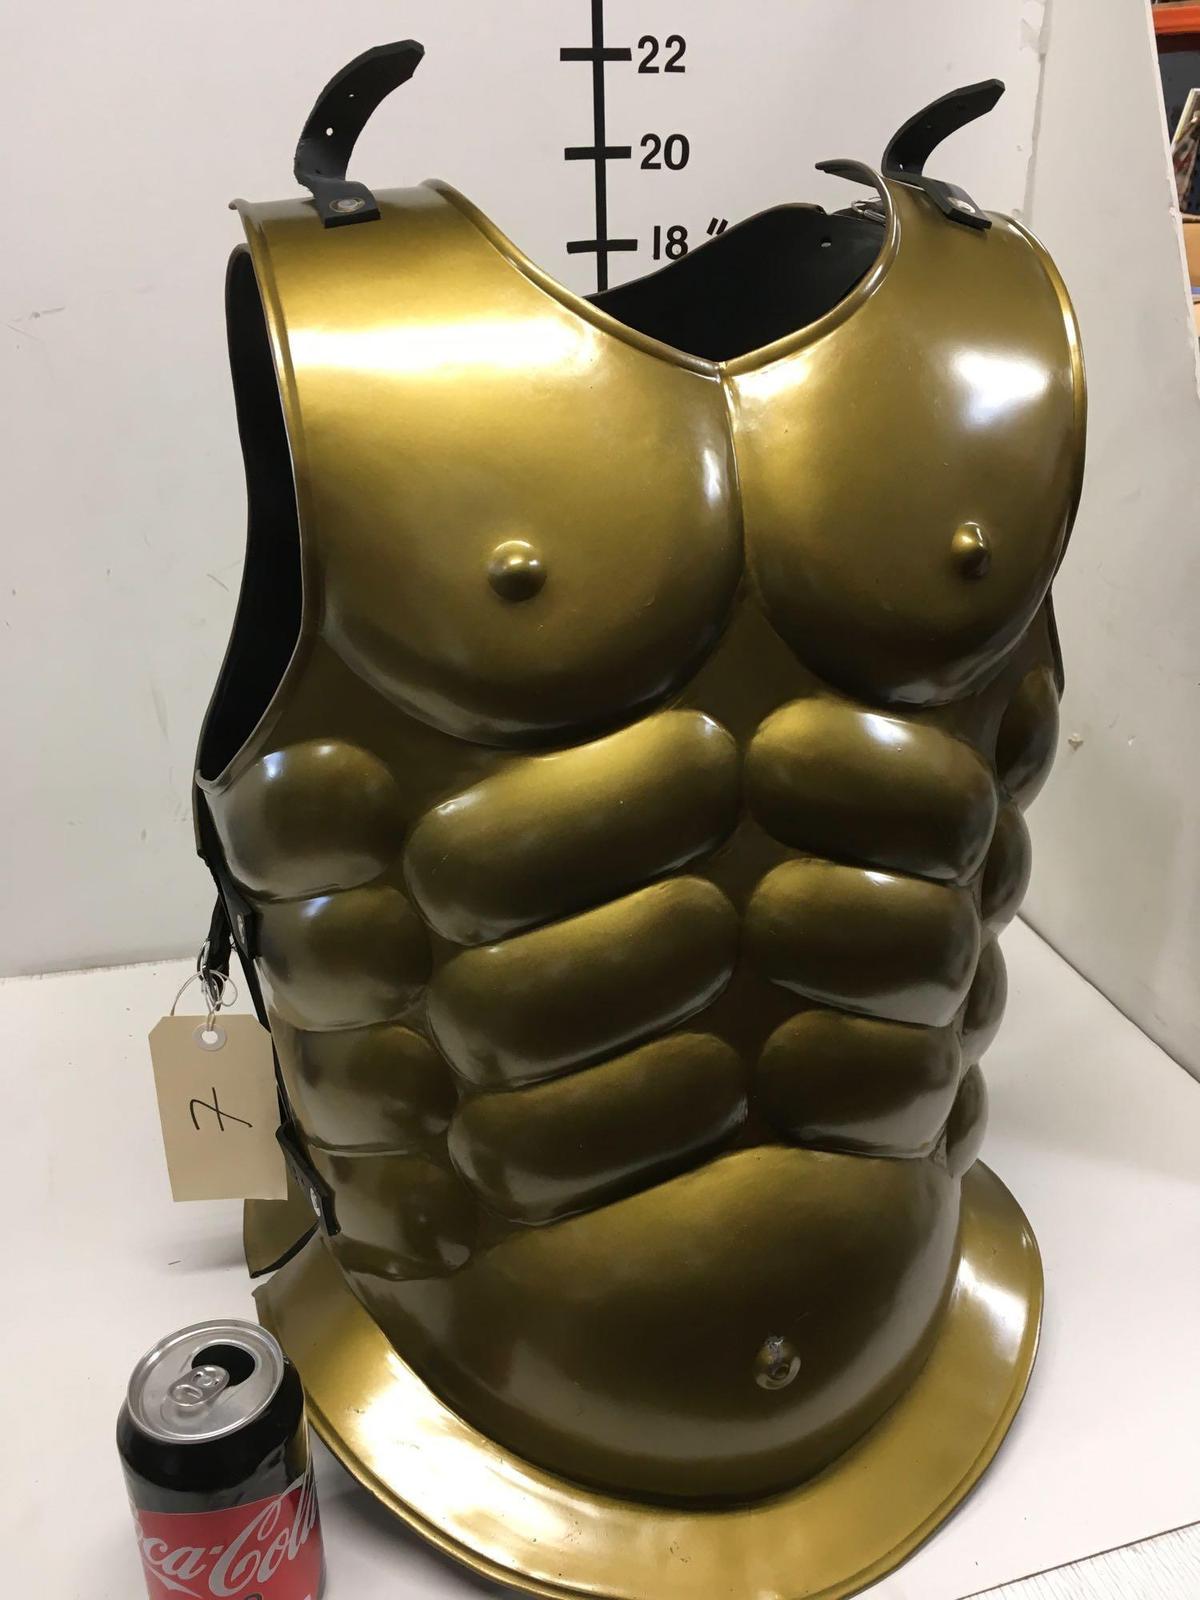 New metal gold finish warrior vest, size fits most